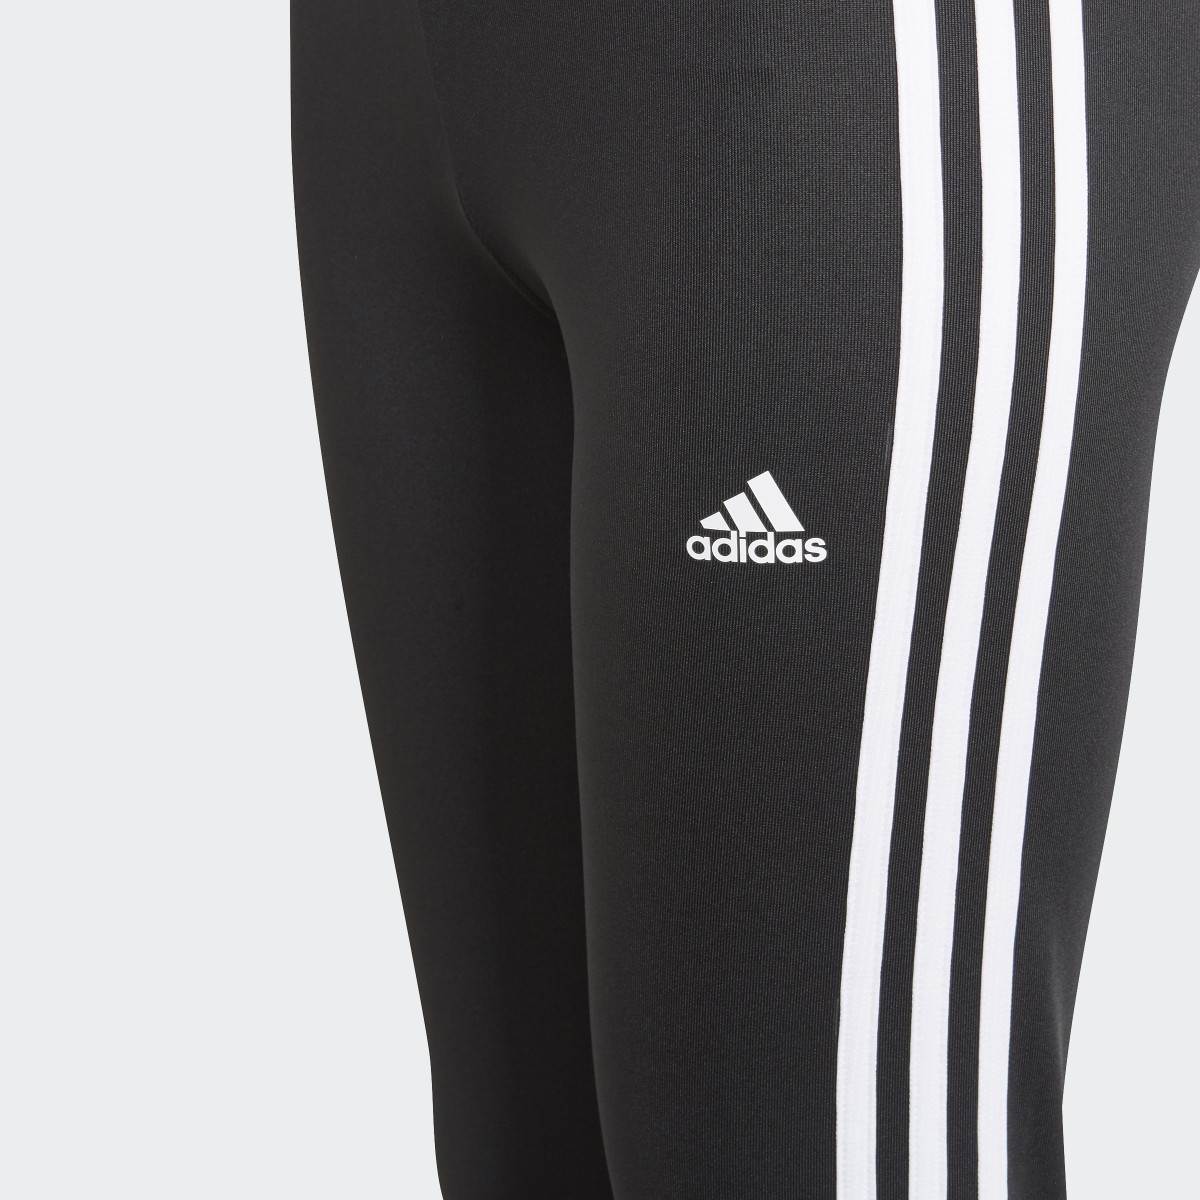 Adidas Designed to Move 3-Stripes Tights. 5